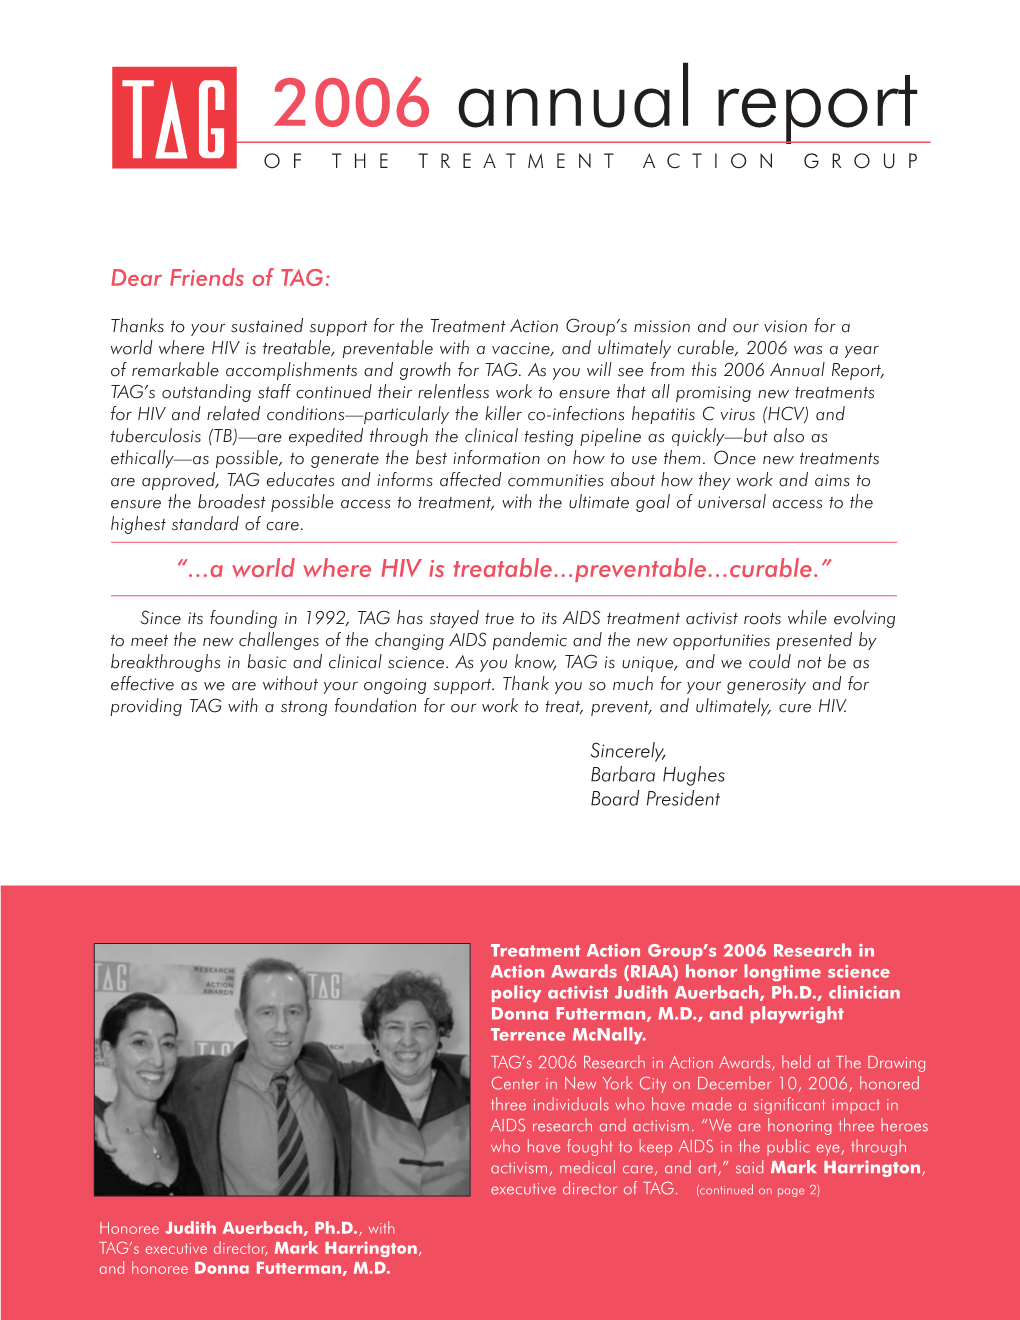 2006 Annual Report of the TREATMENT ACTION GROUP